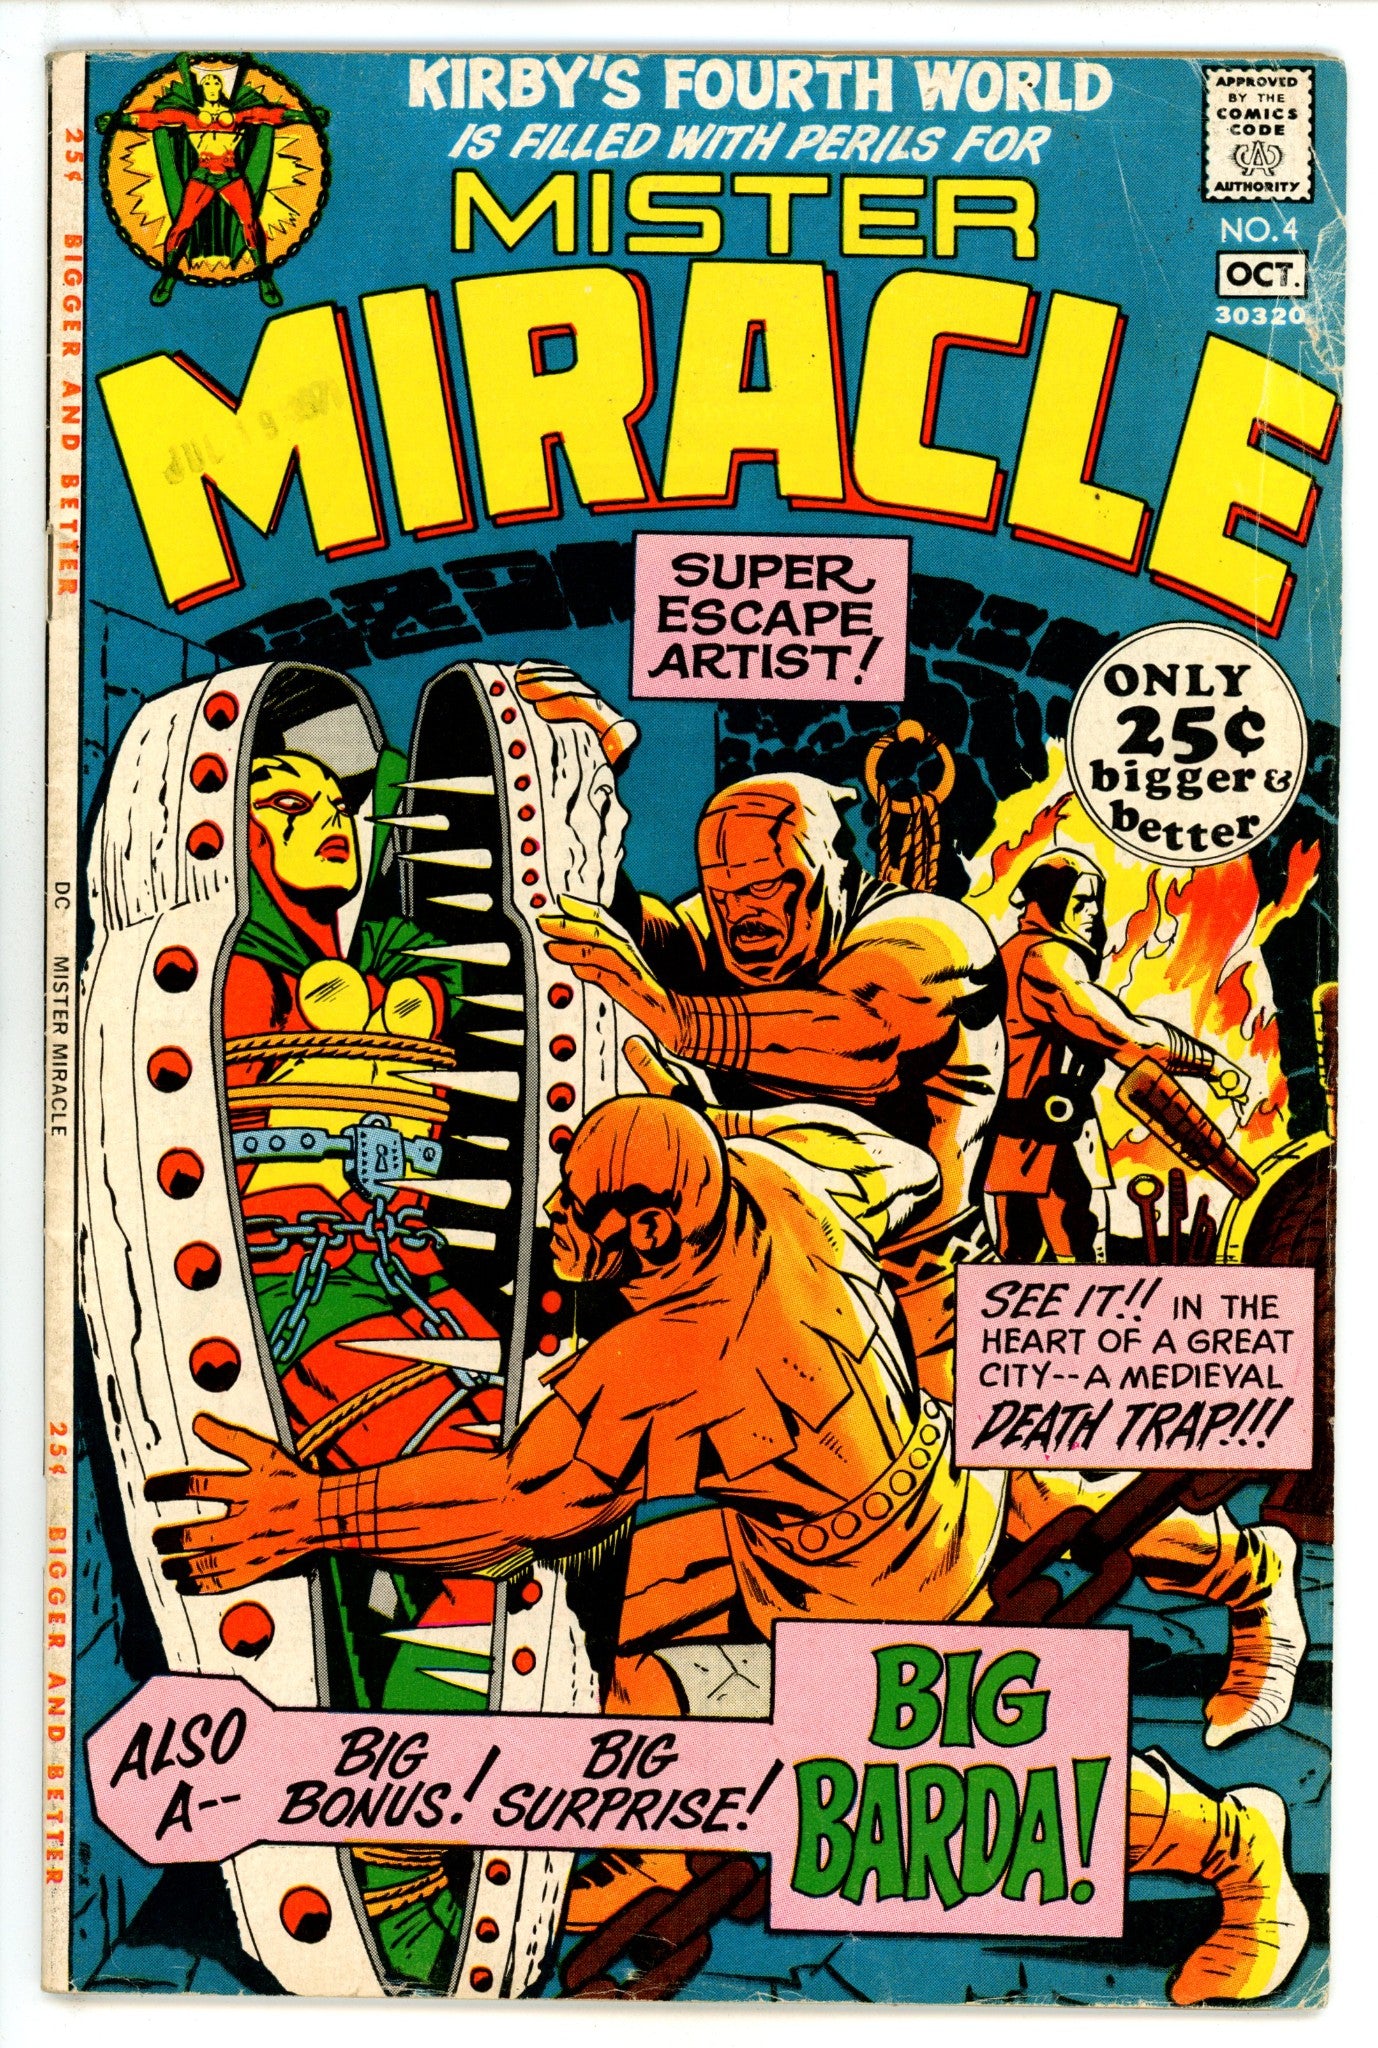 Mister Miracle Vol 1 4 VG (4.0) (1971) 